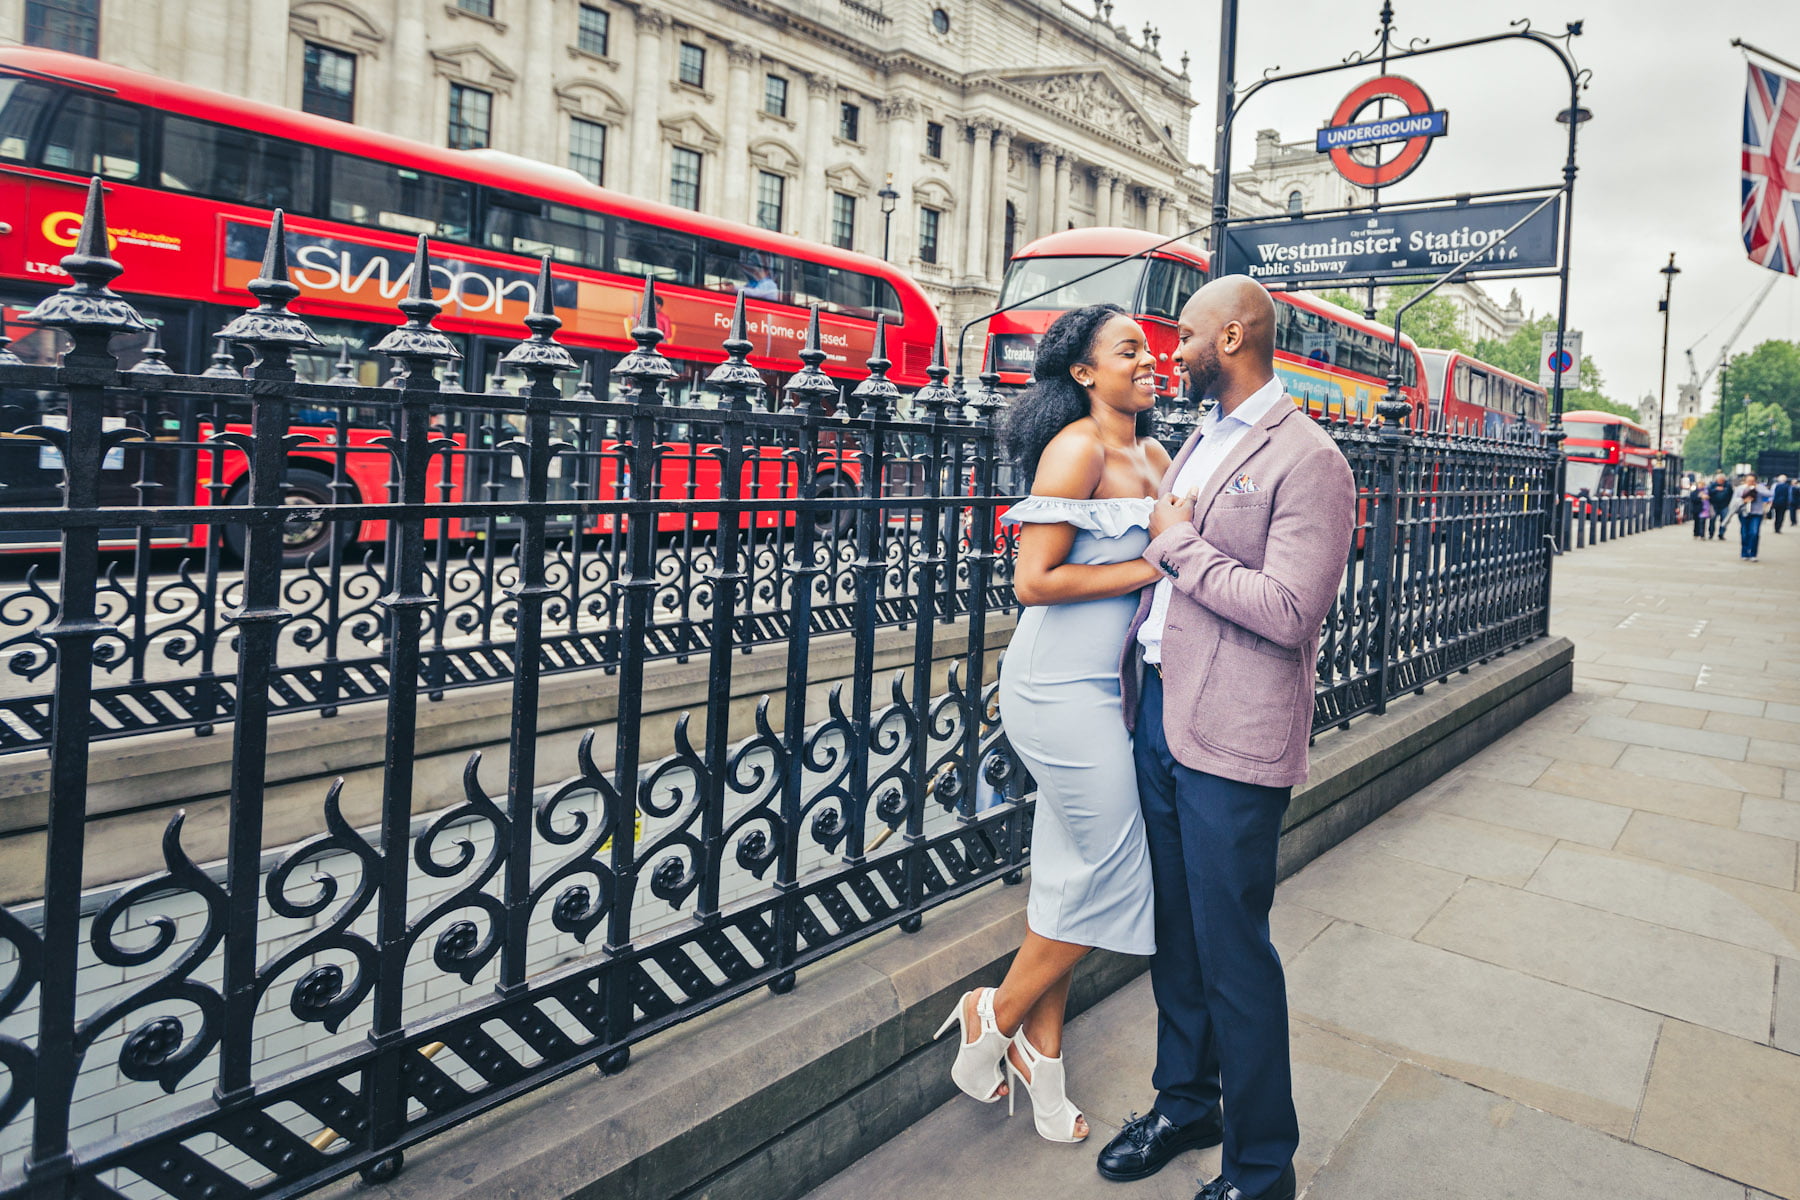 Engagement photography and engagement videography service with a British Nigerian couple in Westminster, St James Park, London